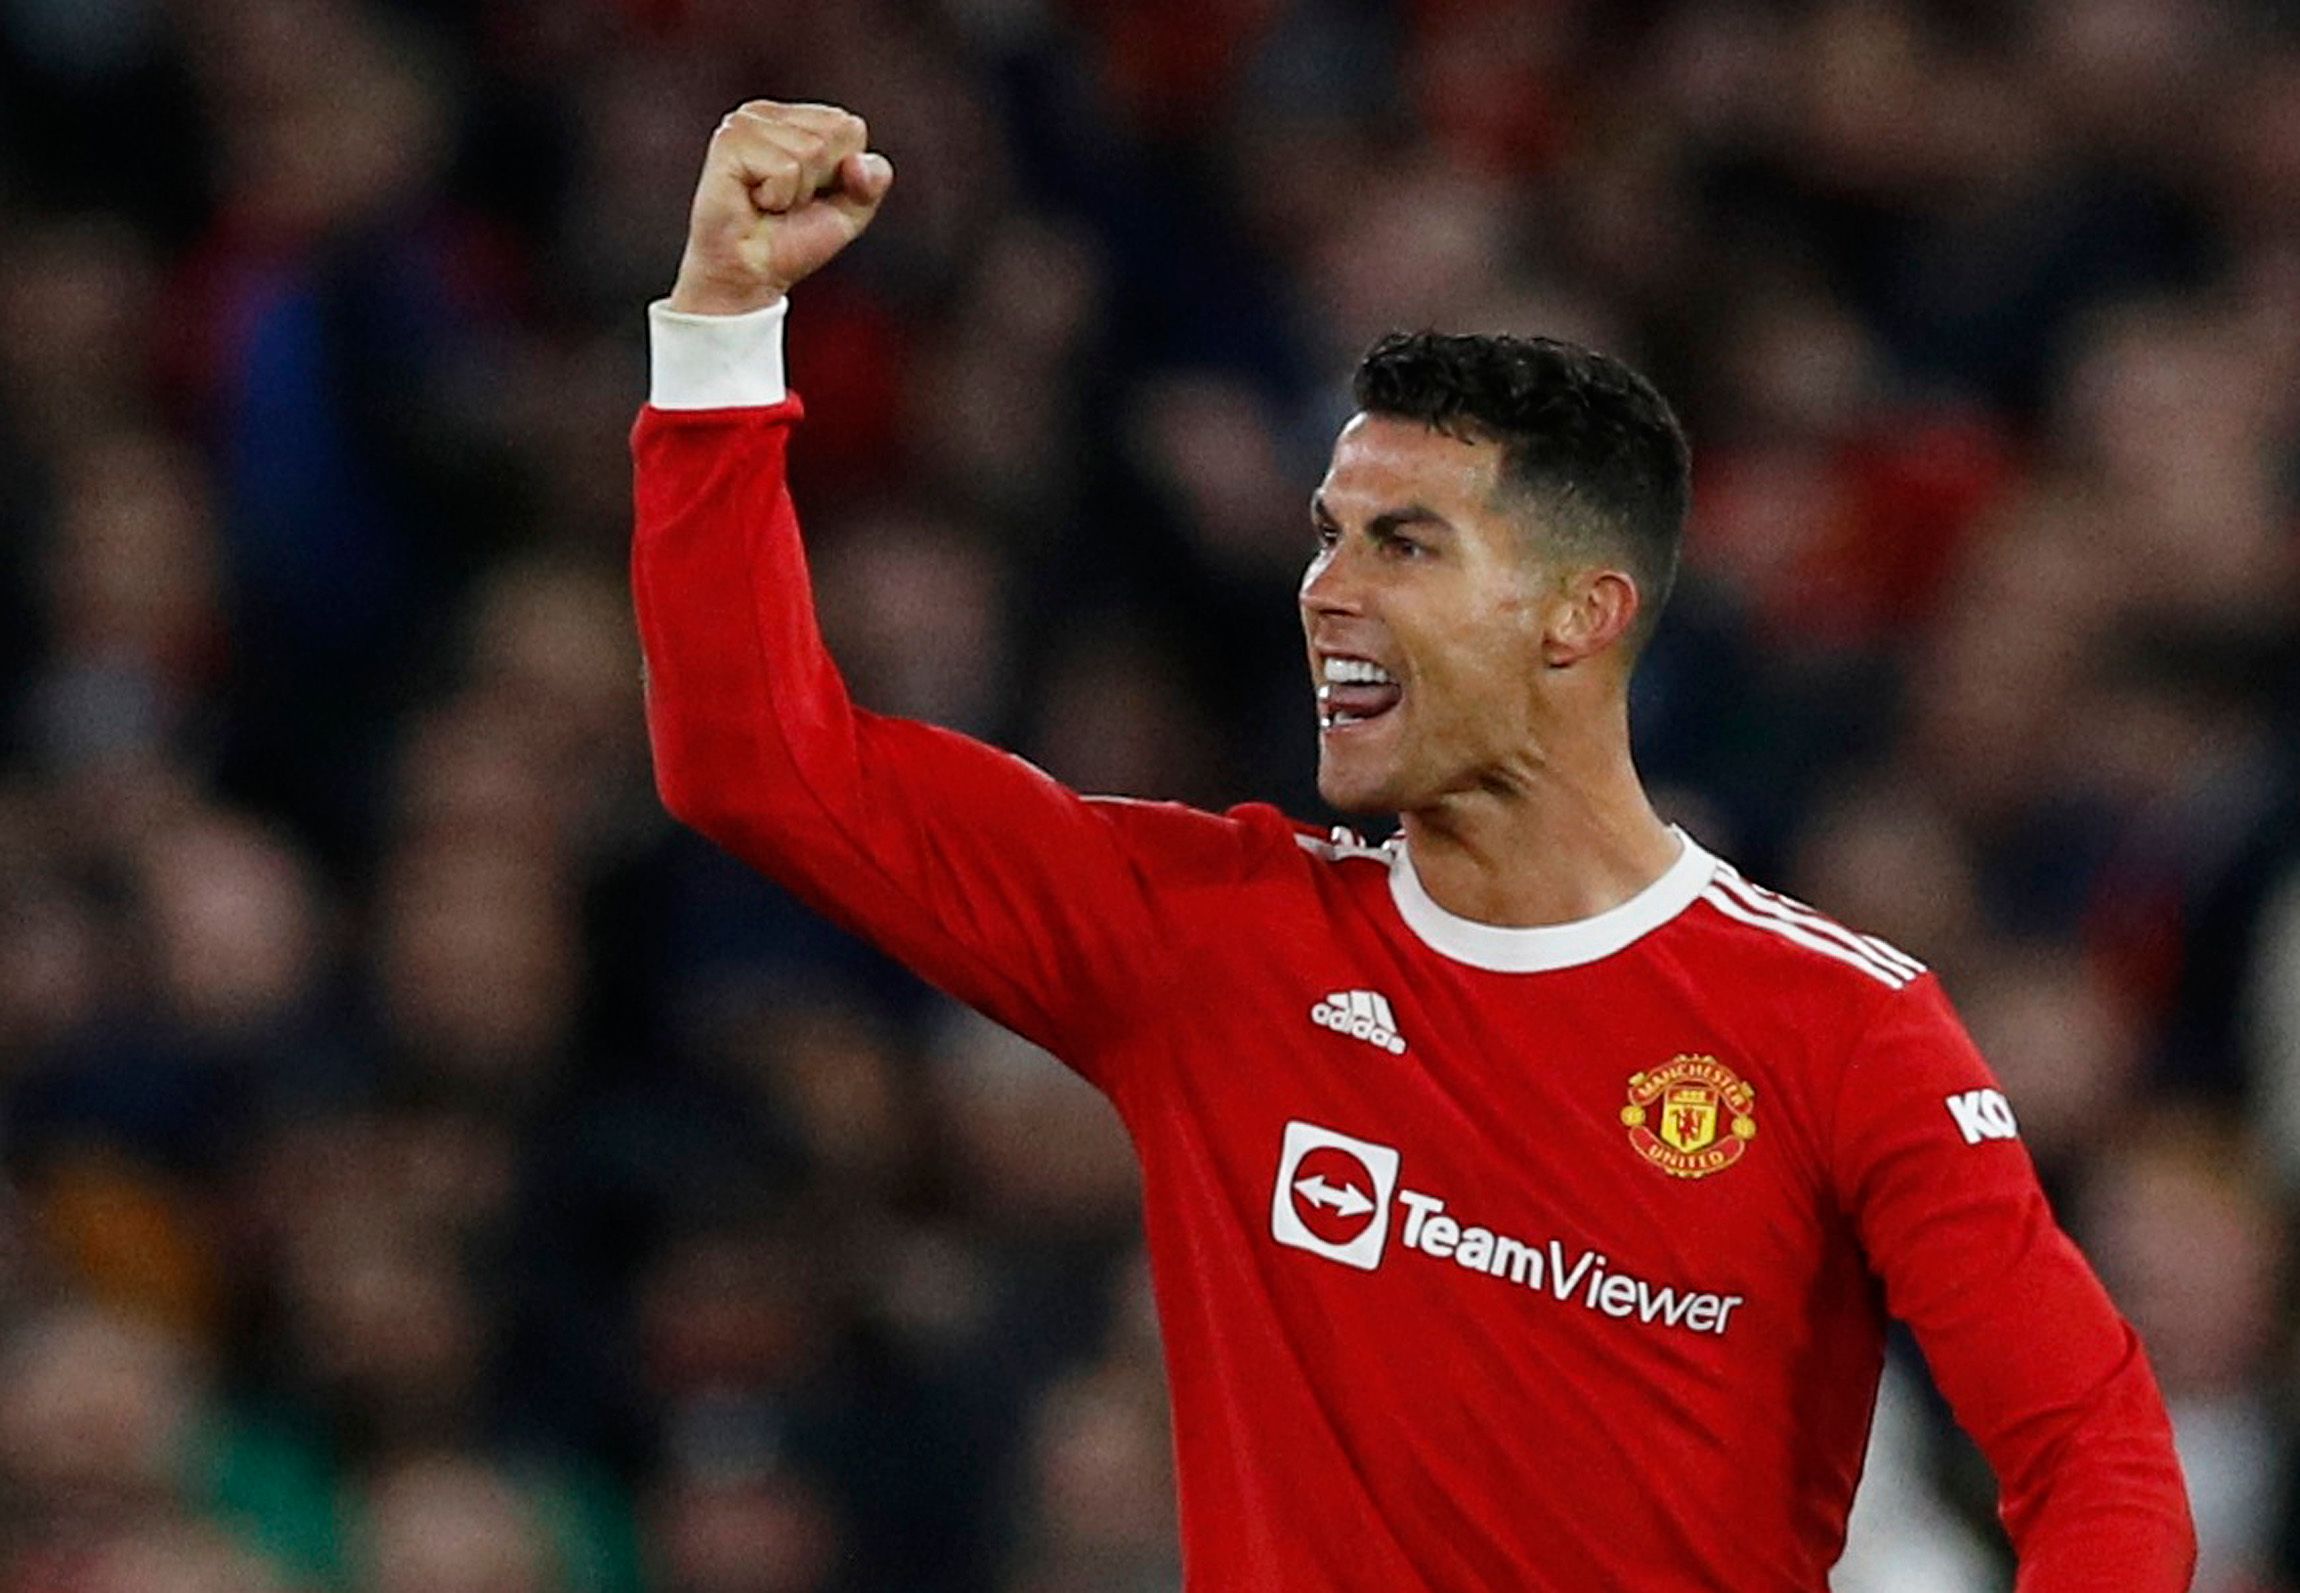 Soccer Football - Champions League - Group F - Manchester United v Atalanta - Old Trafford, Manchester, Britain - October 20, 2021 Manchester United's Cristiano Ronaldo celebrates scoring their third goal REUTERS/Phil Noble